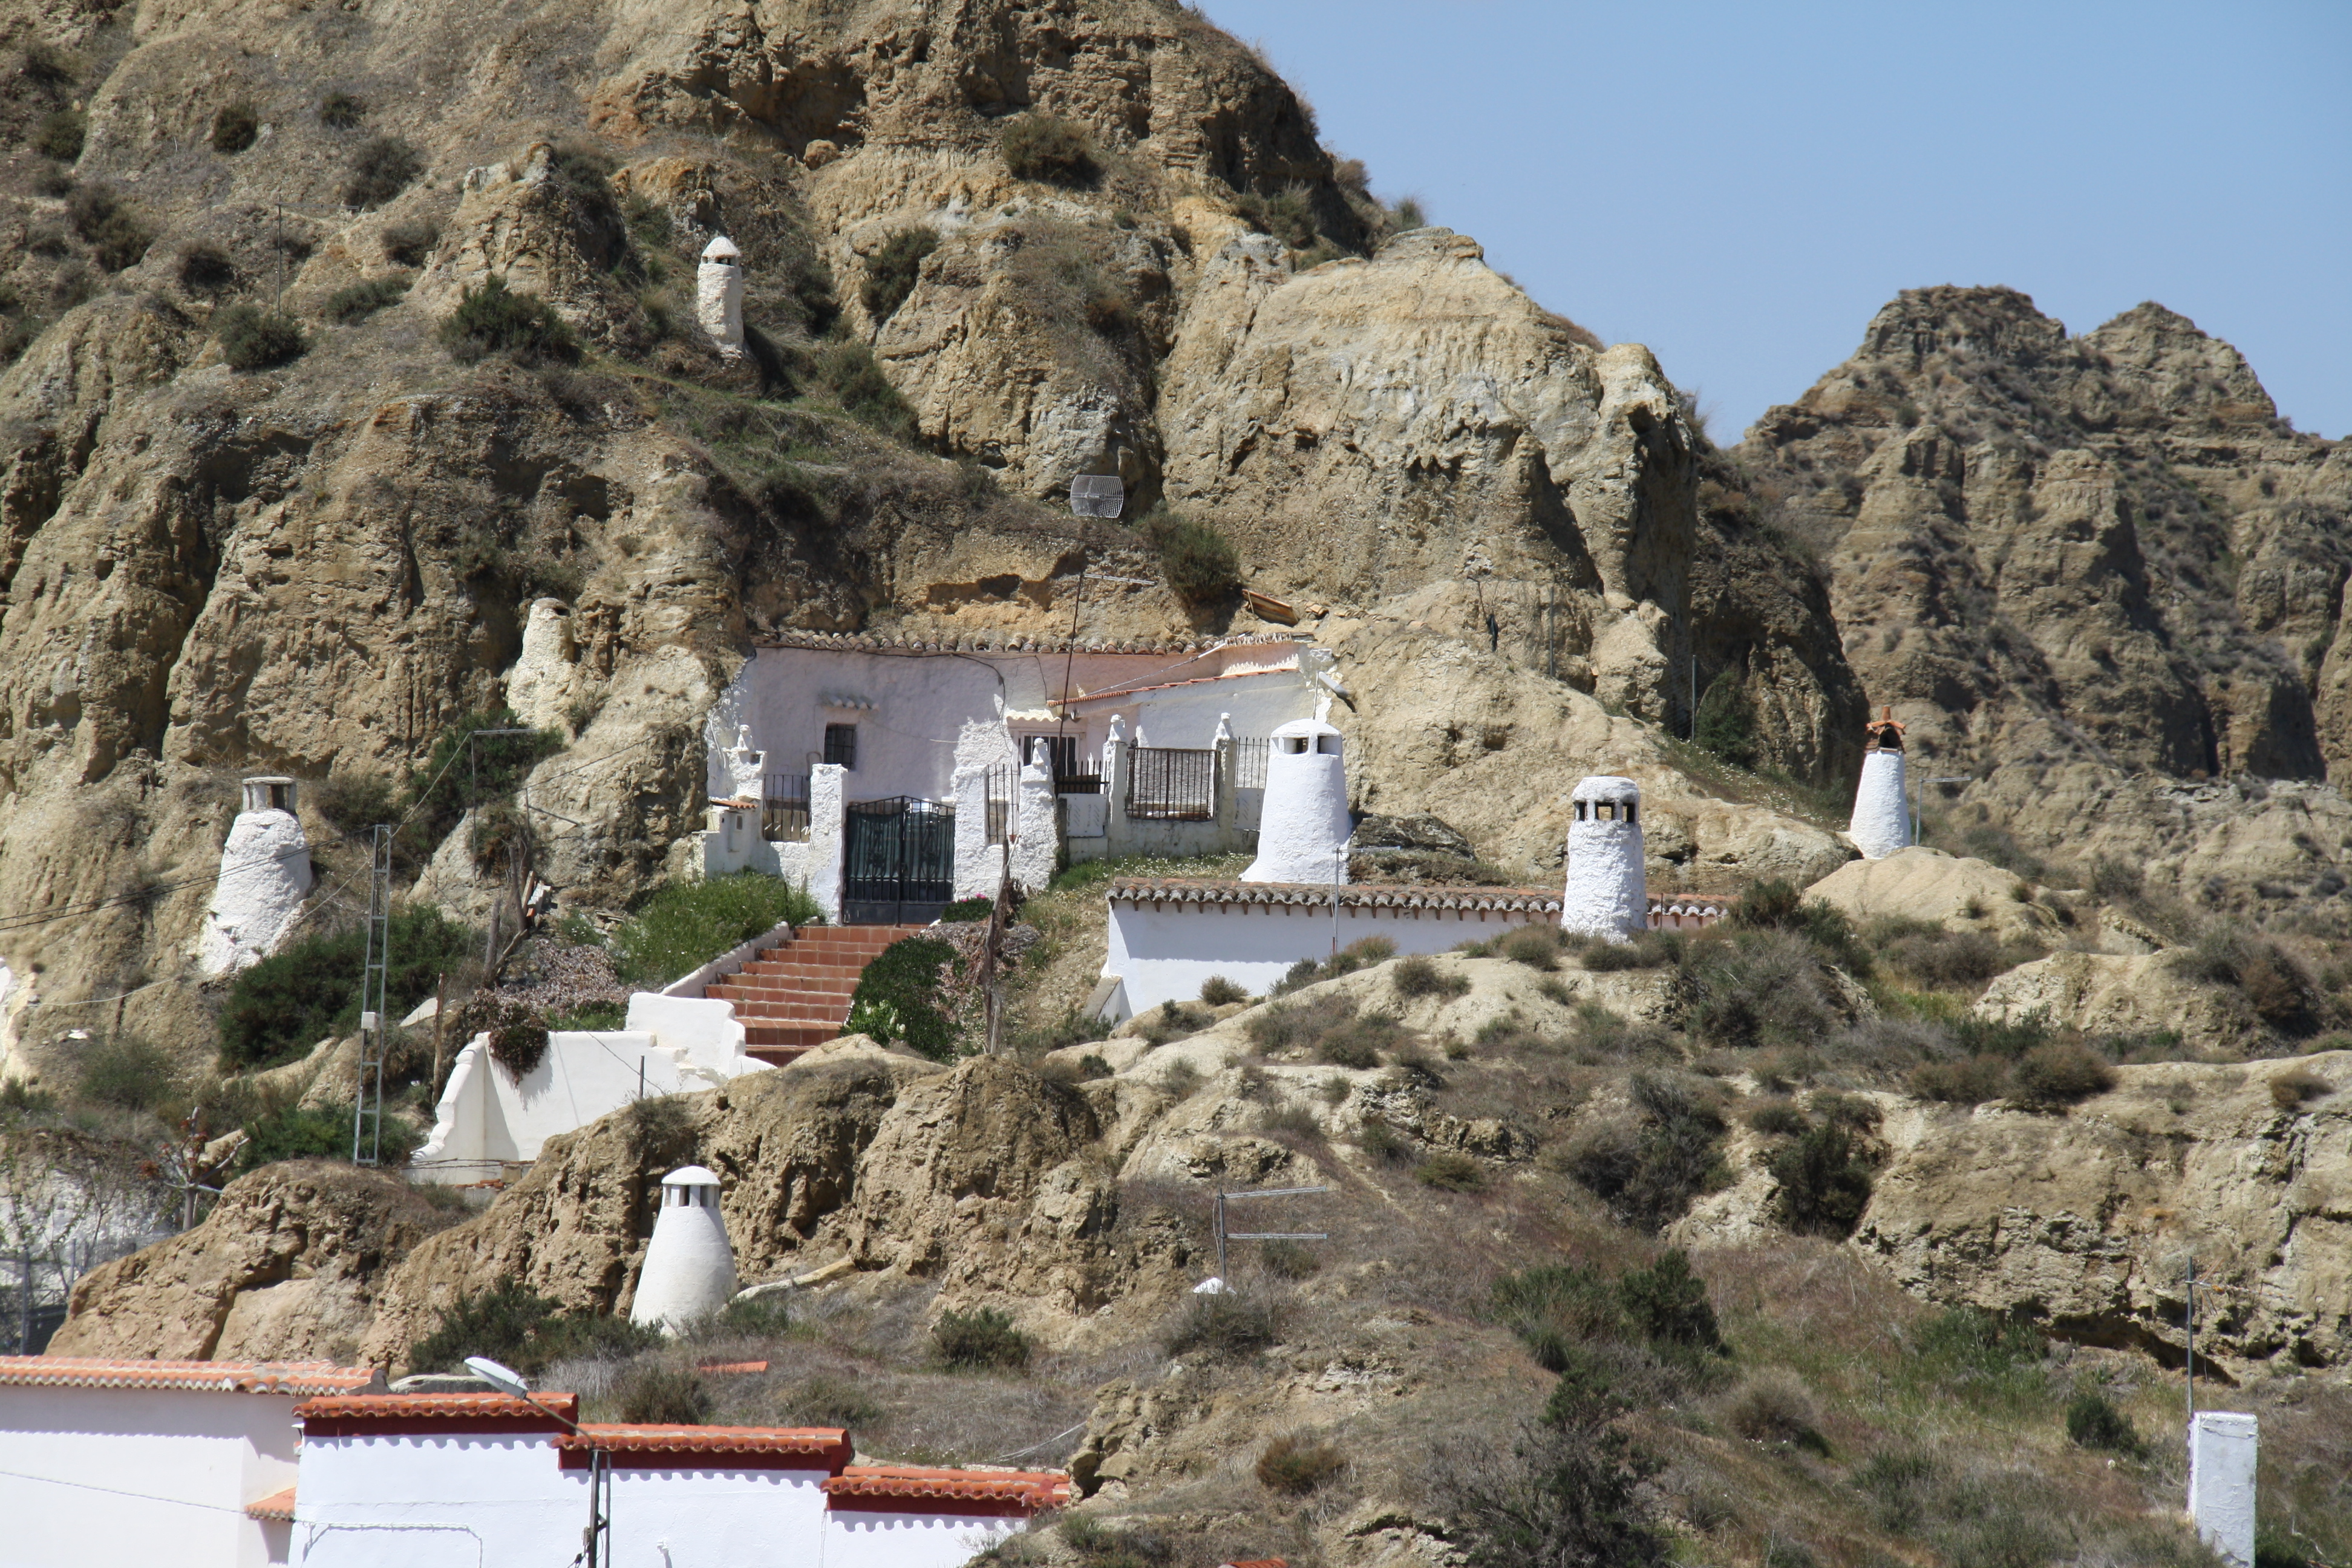 The cave dwellings of Guadix, Spain